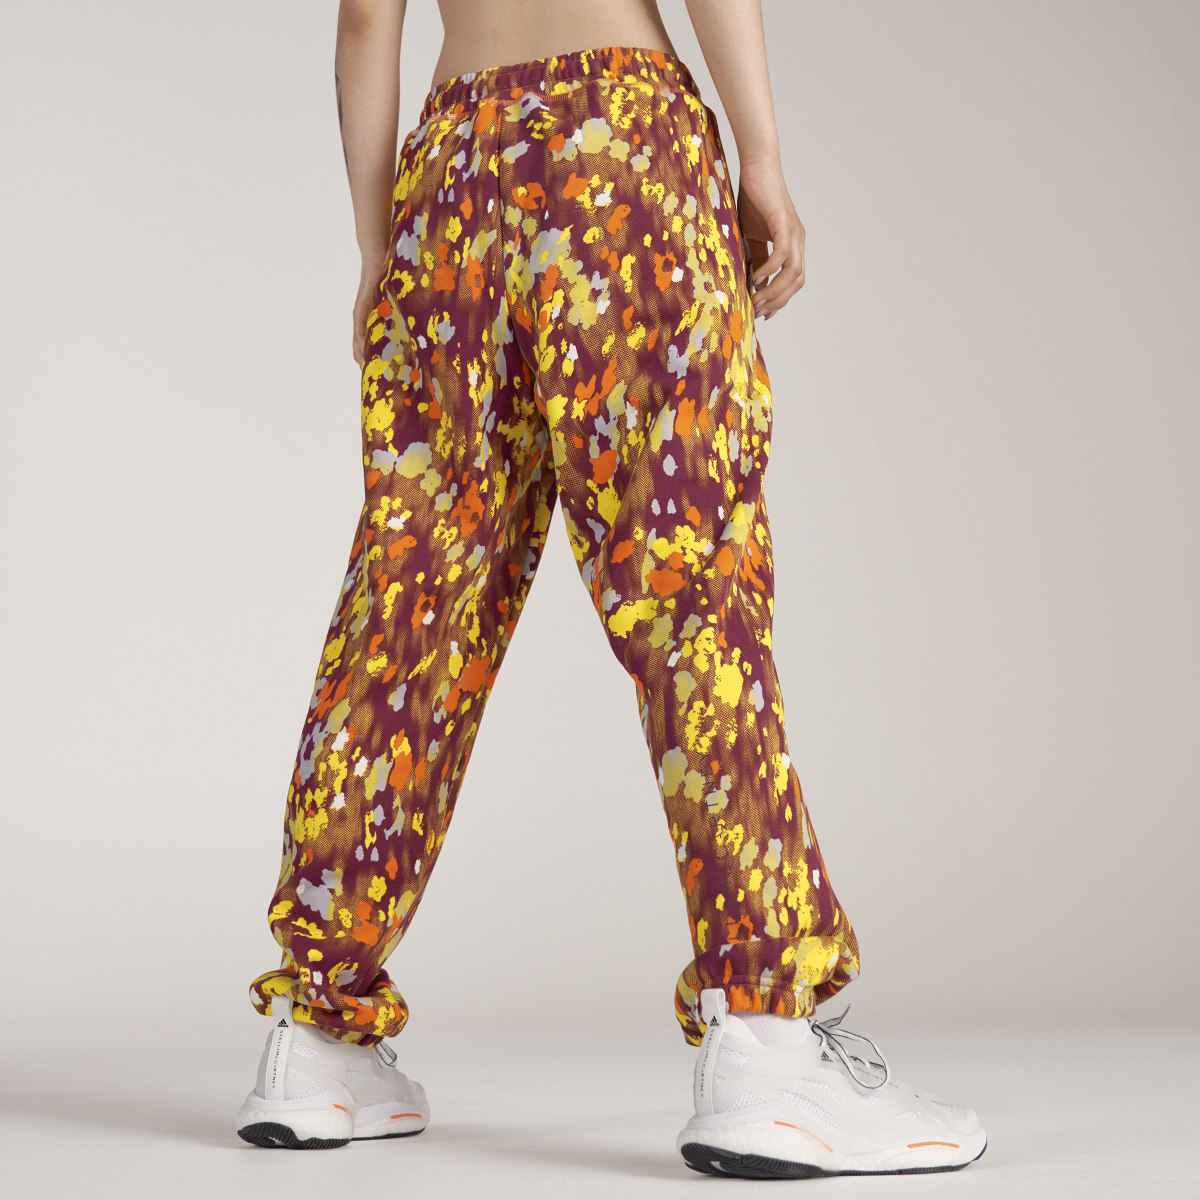 Adidas by Stella McCartney Floral Printed Woven Track Joggers. 10